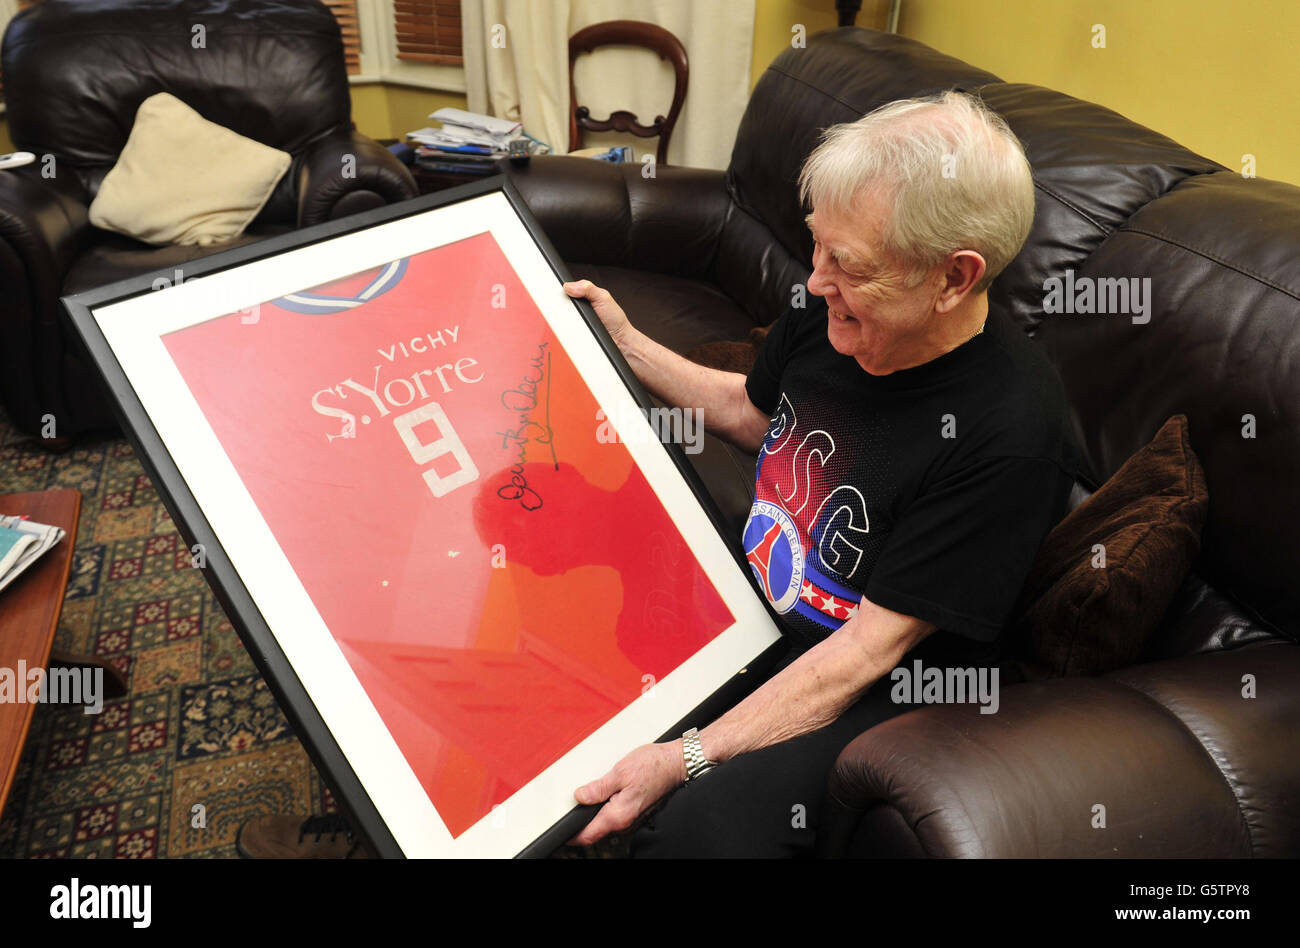 Soccer - Jantzen Derrick Feature - Bristol. Former PSG and Bristol City player Jantzen Derrick poses with a framed shirt, at his home in Bristol. Stock Photo